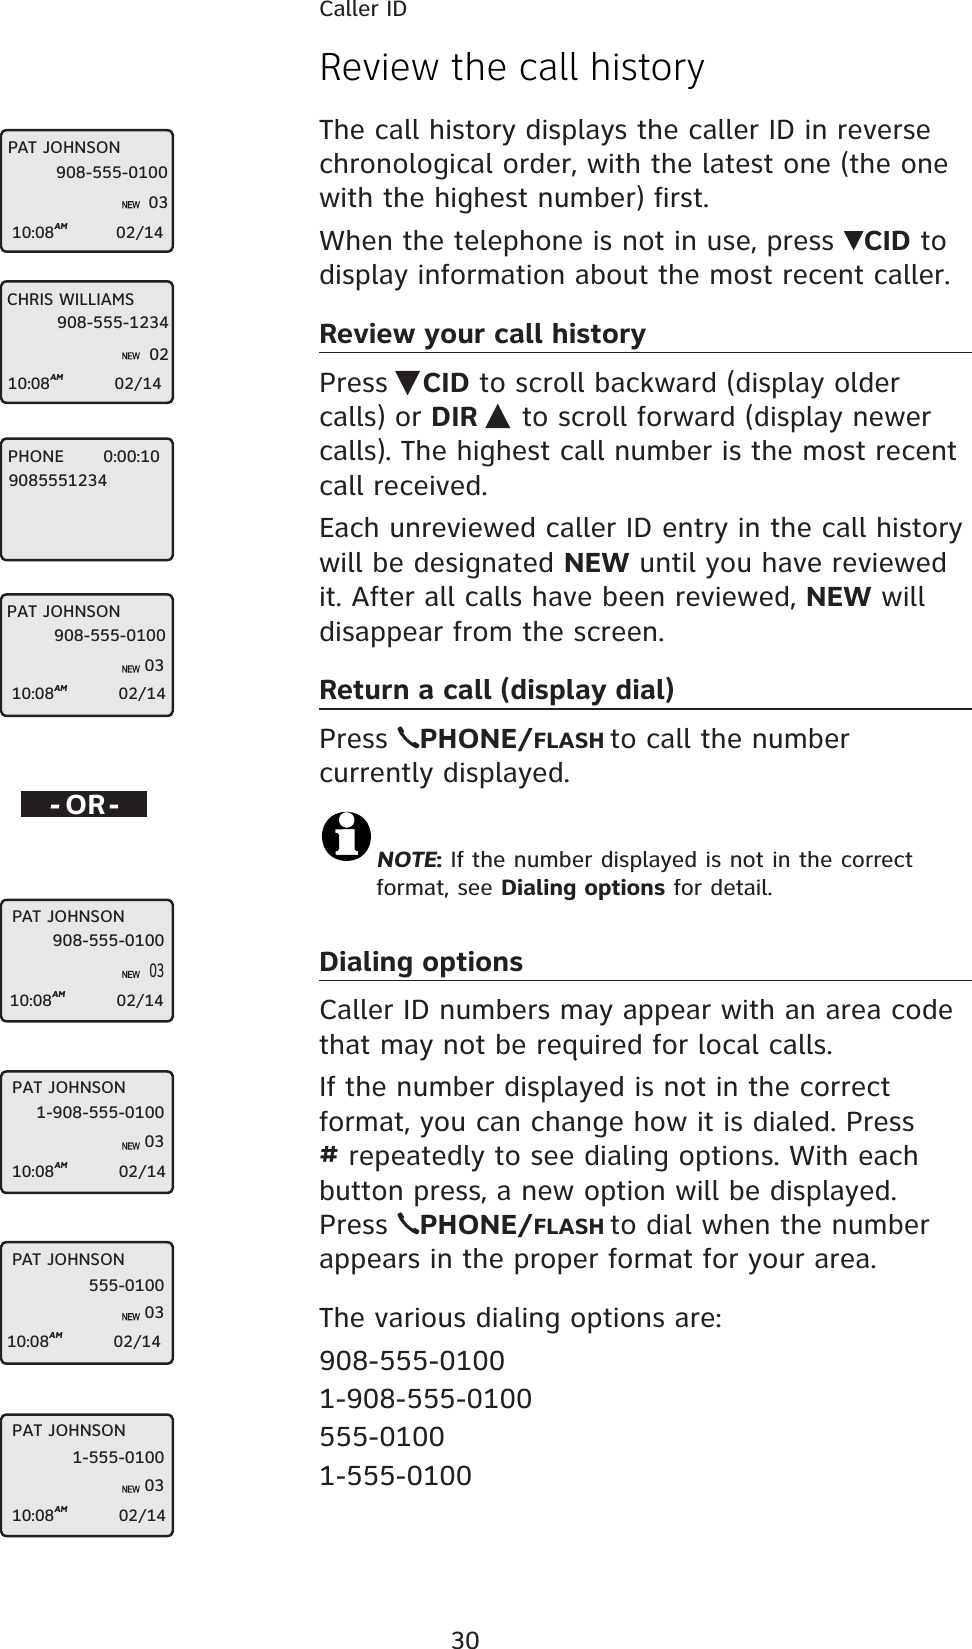 30Caller IDReview the call historyThe call history displays the caller ID in reverse chronological order, with the latest one (the one with the highest number) first.When the telephone is not in use, press  CID to display information about the most recent caller.Review your call historyPress  CID to scroll backward (display older calls) or DIR  to scroll forward (display newer calls). The highest call number is the most recent call received.Each unreviewed caller ID entry in the call history will be designated NEW until you have reviewed it. After all calls have been reviewed, NEW will disappear from the screen.Return a call (display dial)Press  PHONE/FLASH to call the number currently displayed.NOTE: If the number displayed is not in the correct format, see Dialing options for detail.Dialing optionsCaller ID numbers may appear with an area code that may not be required for local calls. If the number displayed is not in the correct format, you can change how it is dialed. Press # repeatedly to see dialing options. With each button press, a new option will be displayed. Press  PHONE/FLASH to dial when the number appears in the proper format for your area.The various dialing options are:908-555-01001-908-555-0100555-01001-555-0100-OR-PAT JOHNSON908-555-010003PAT JOHNSON10:08AM                    02/141-908-555-010003PAT JOHNSON10:08AM                    02/14555-010003PAT JOHNSON10:08AM                    02/141-555-010003PAT JOHNSON908-555-010003CHRIS WILLIAMS10:08AM                    02/14908-555-123402PAT JOHNSON10:08AM                   02/14908-555-010003PHONE       0:00:10908555123410:08AM                    02/1410:08AM                    02/14